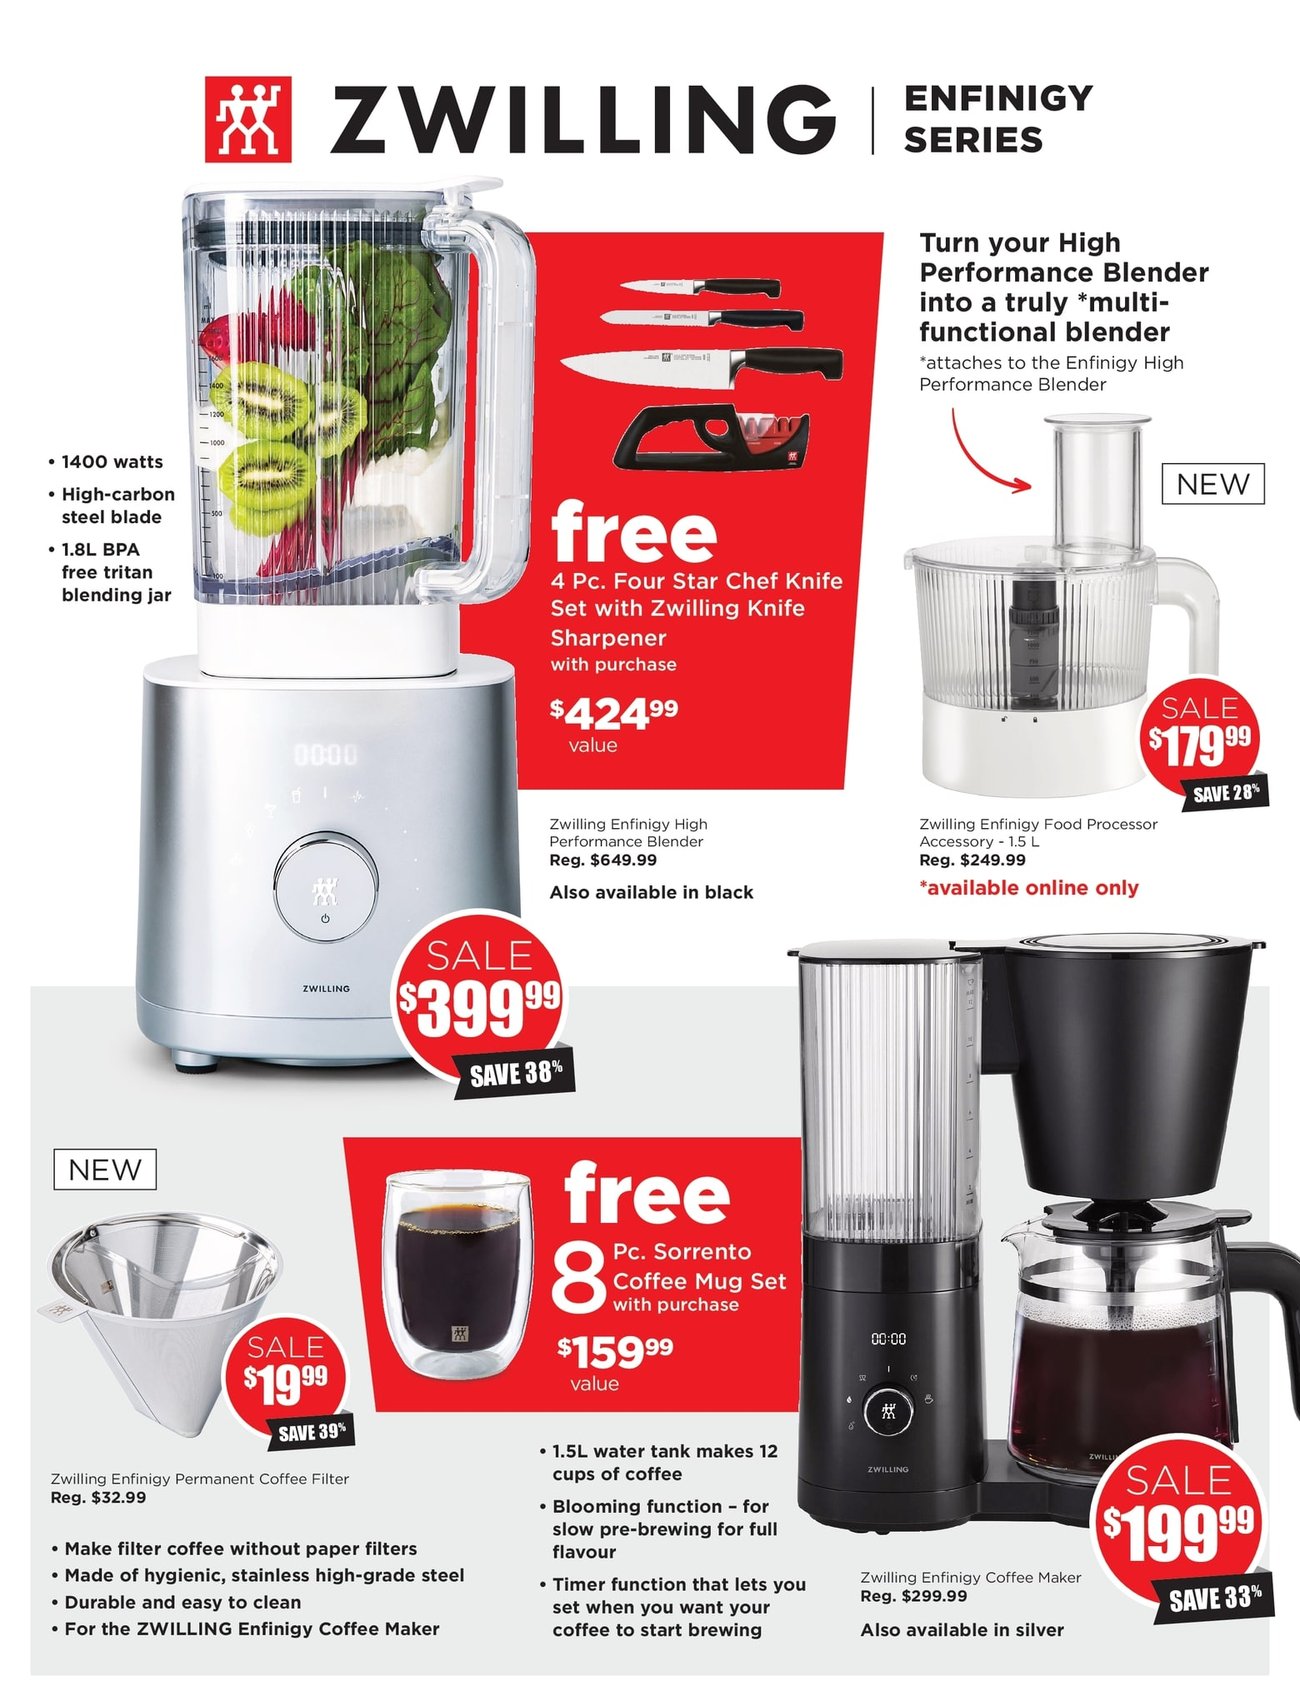 Kitchen Stuff Plus - Everything Cooking Sale - Page 9